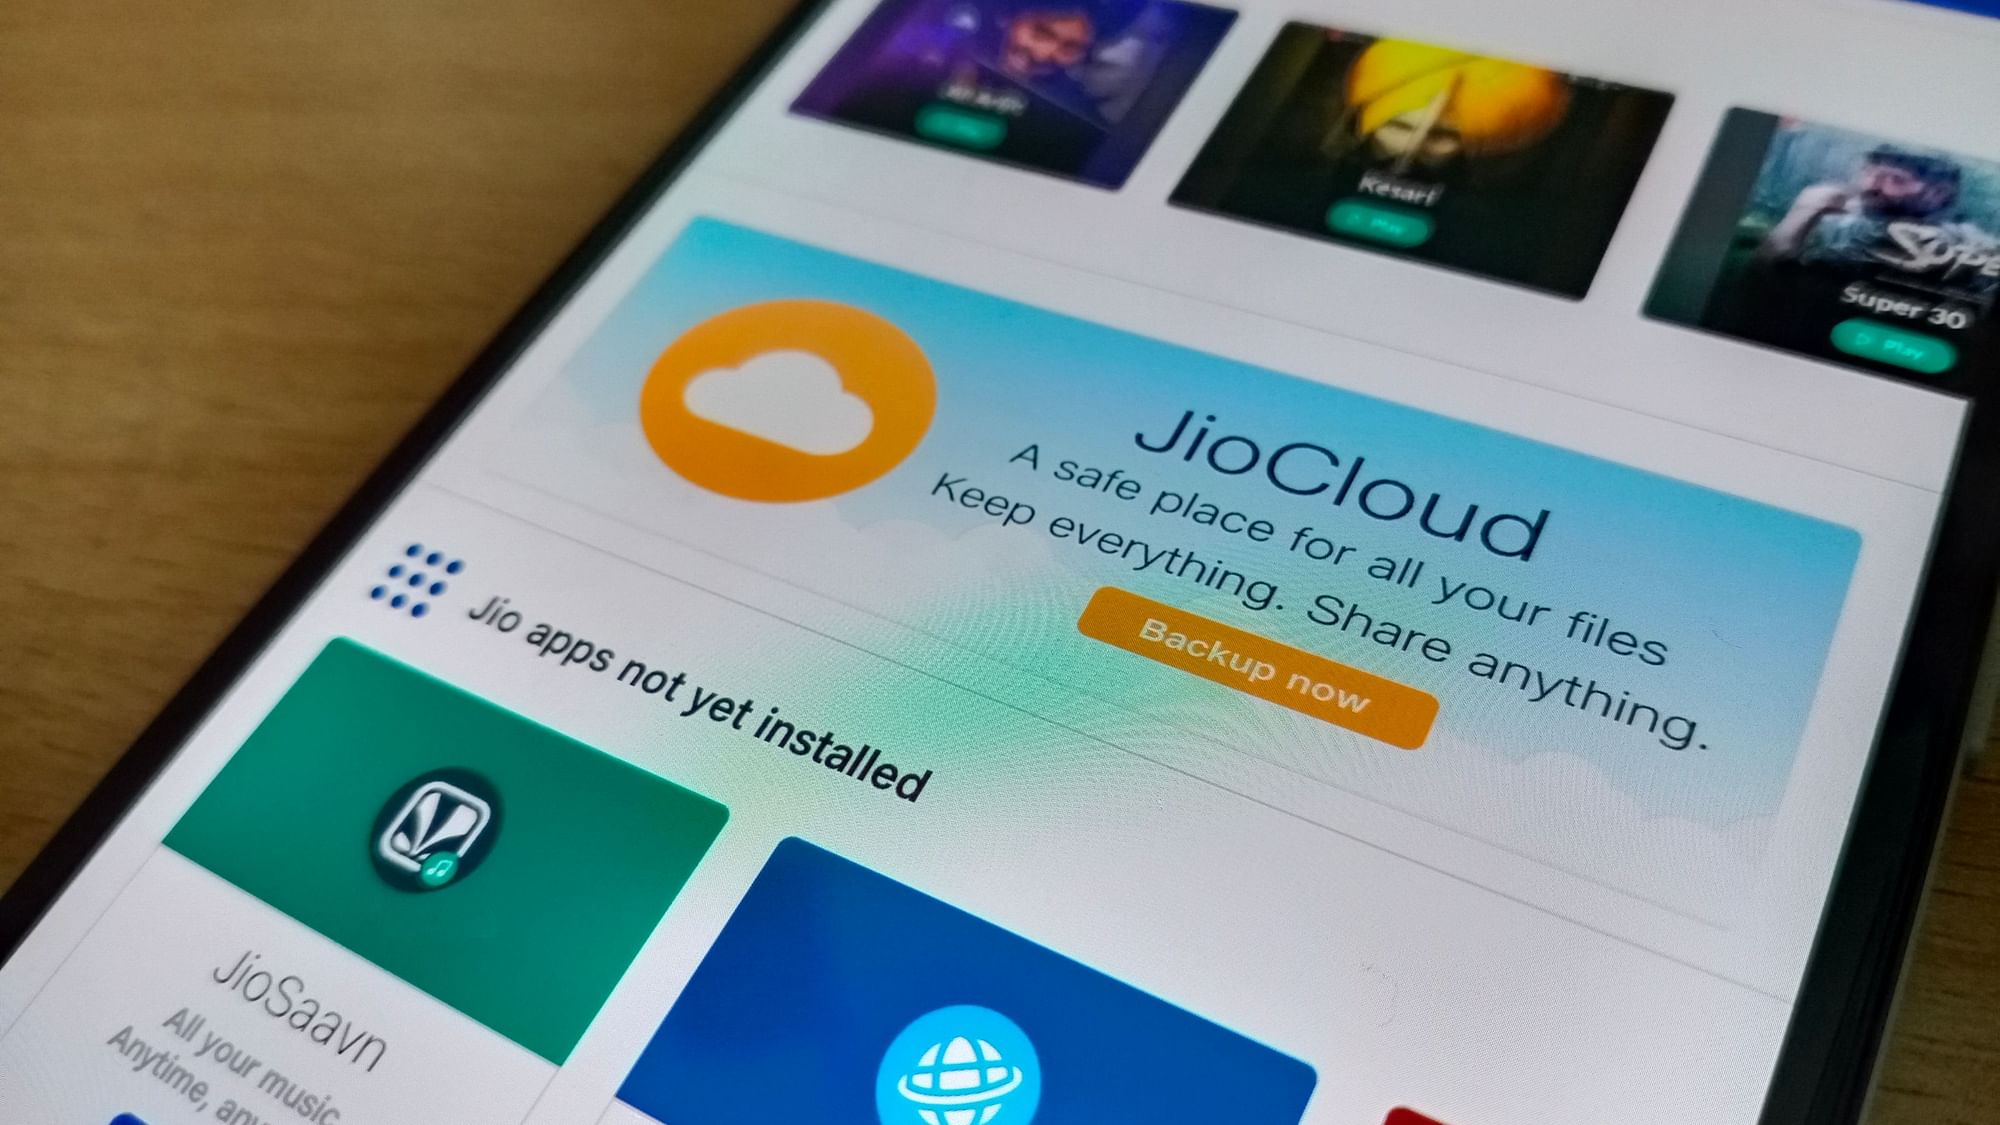 Reliance Jio Offering Free 5GB Cloud Storage: Are you keen on signing up for JioCloud?